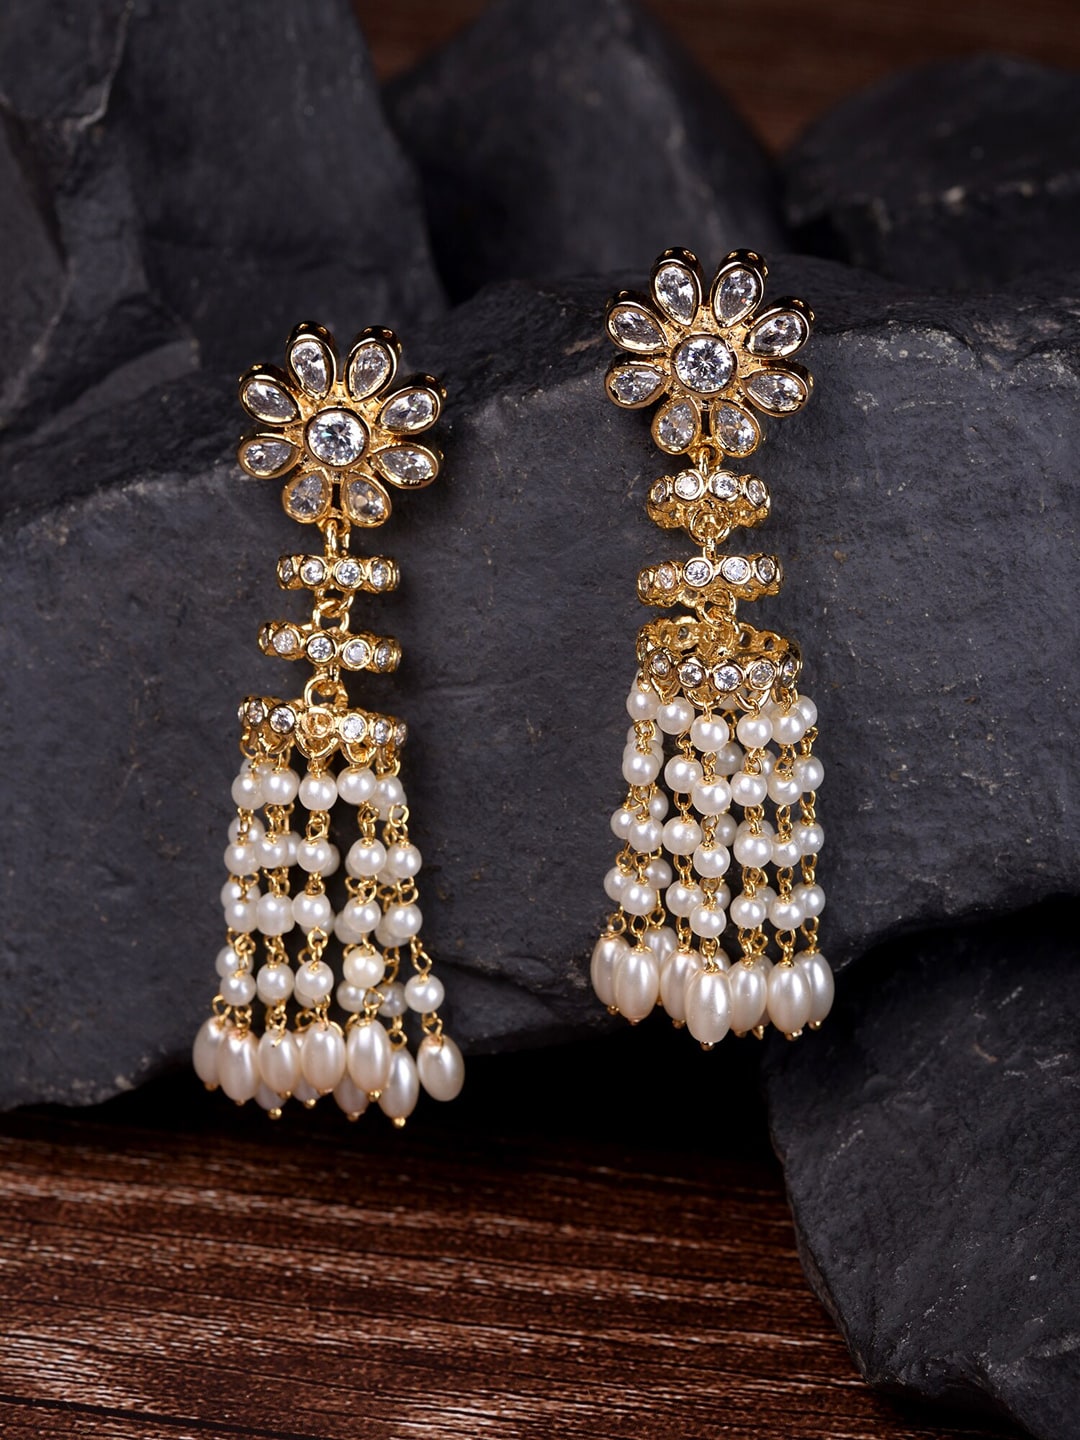 Saraf RS Jewellery Gold-Toned Pearl Beaded Drop Earrings Price in India